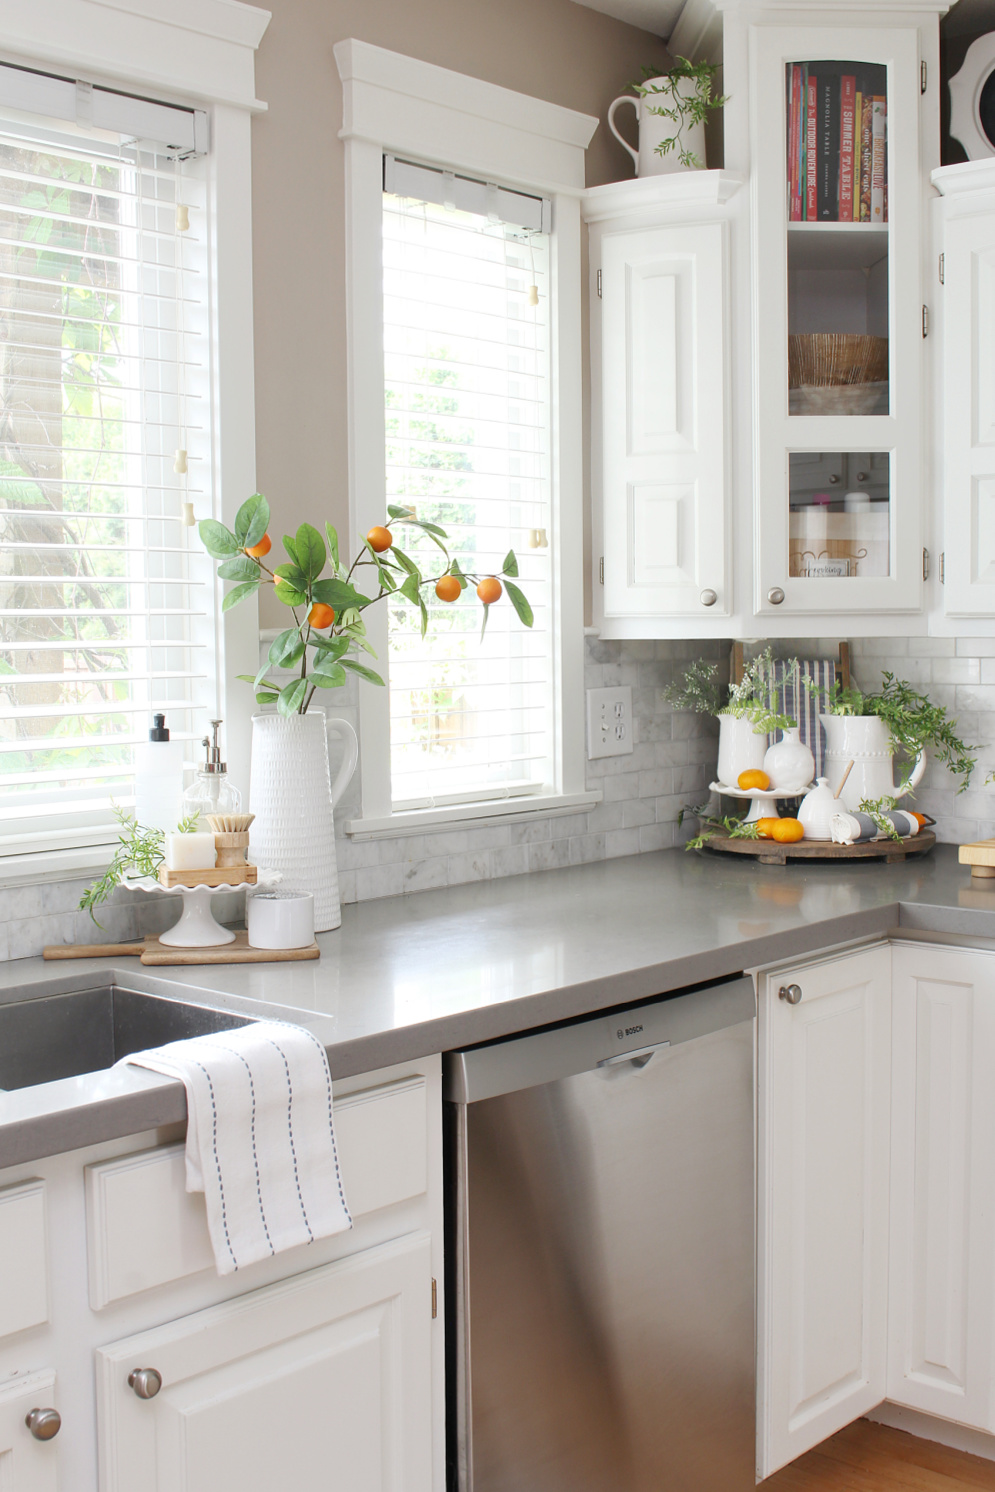 A white kitchen decked out for summer with a pop of orange.